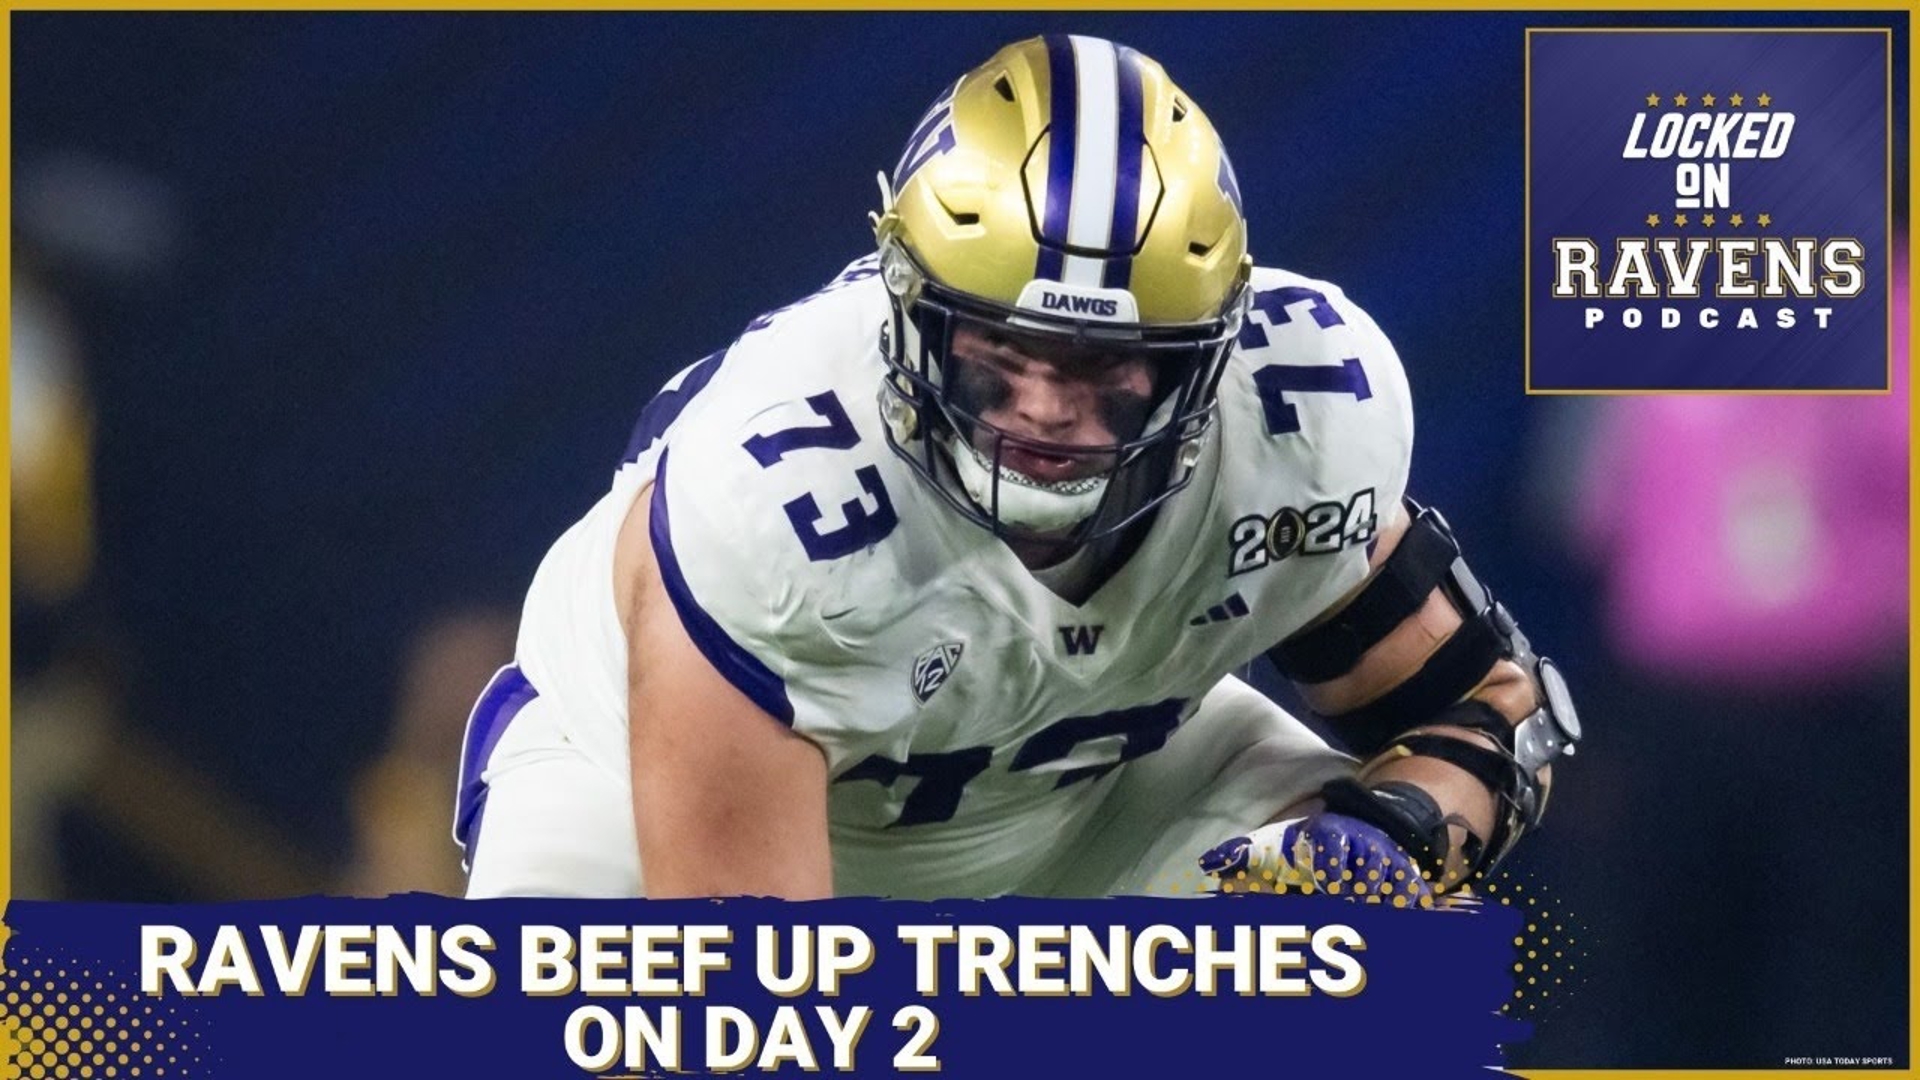 We look at the Baltimore Ravens beefing up their trenches on Day 2 of the 2024 NFL draft, looking at the selections of Roger Rosengarten, Adisa Isaac and more.